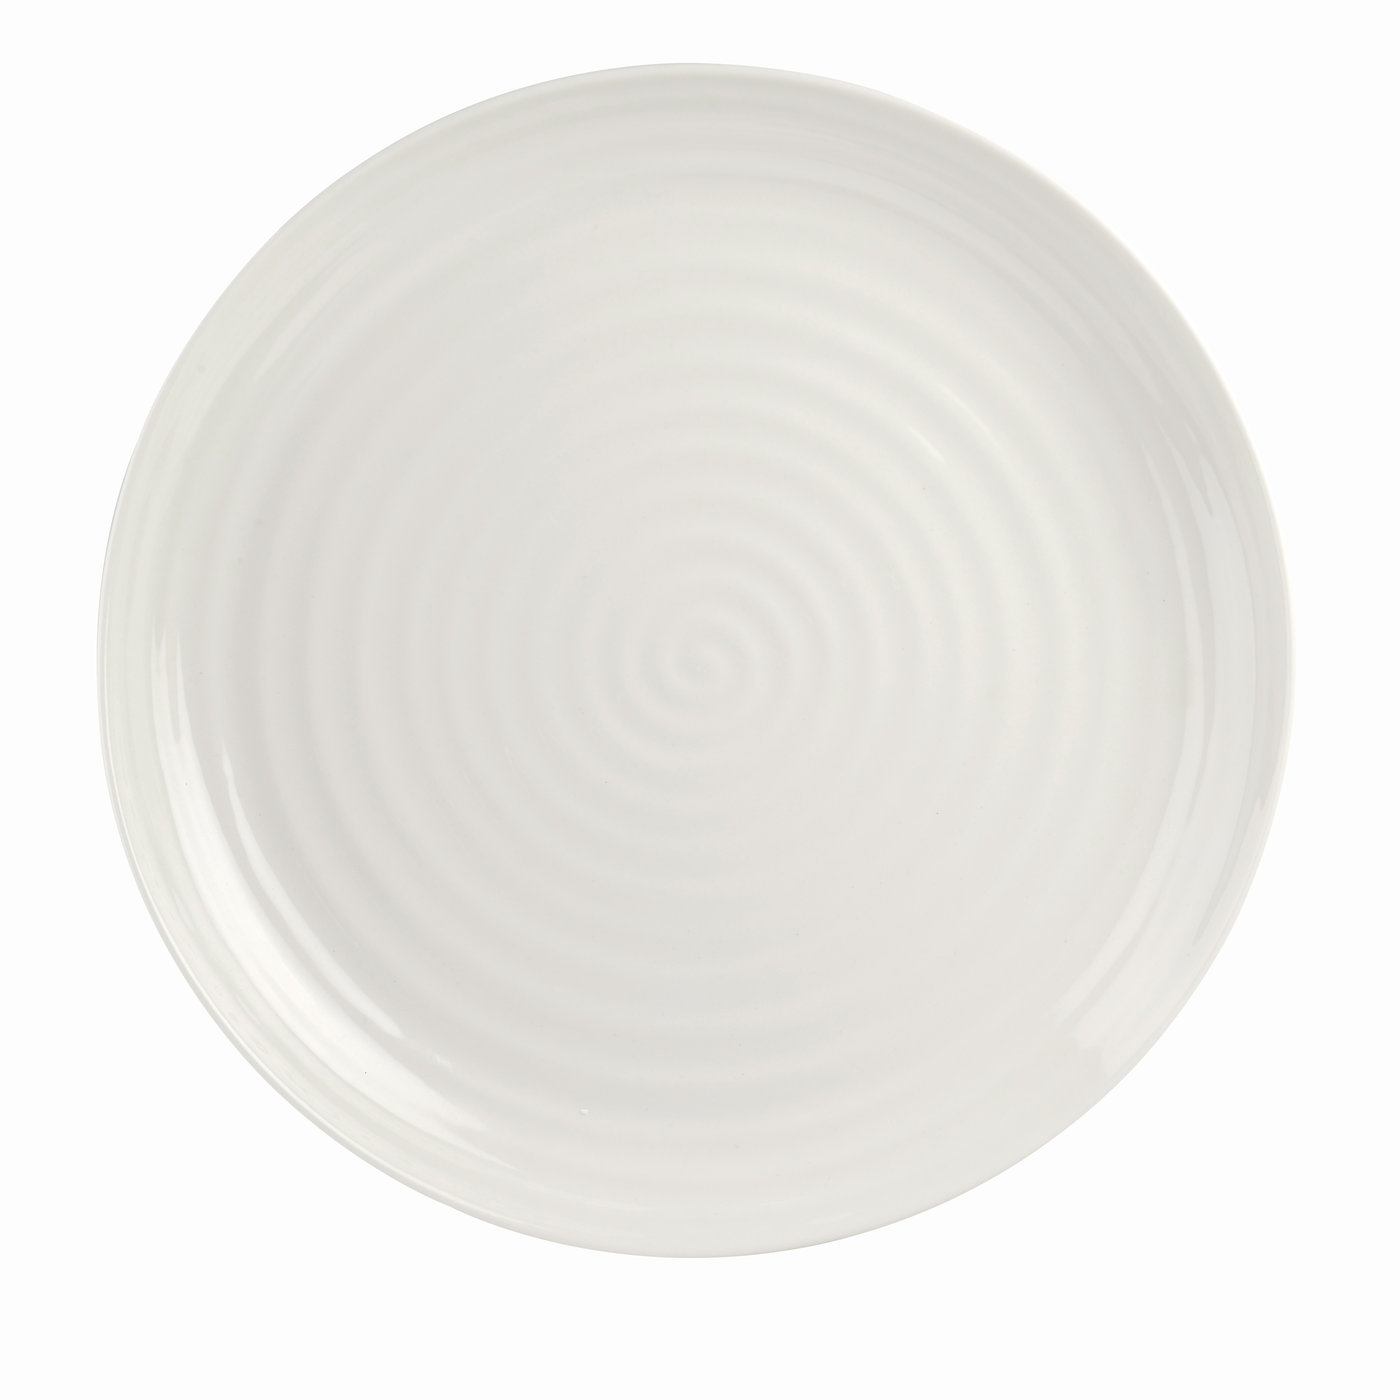 Portmeirion Sophie Conran Coupe Plate 10.5 Inch (Set of 2)